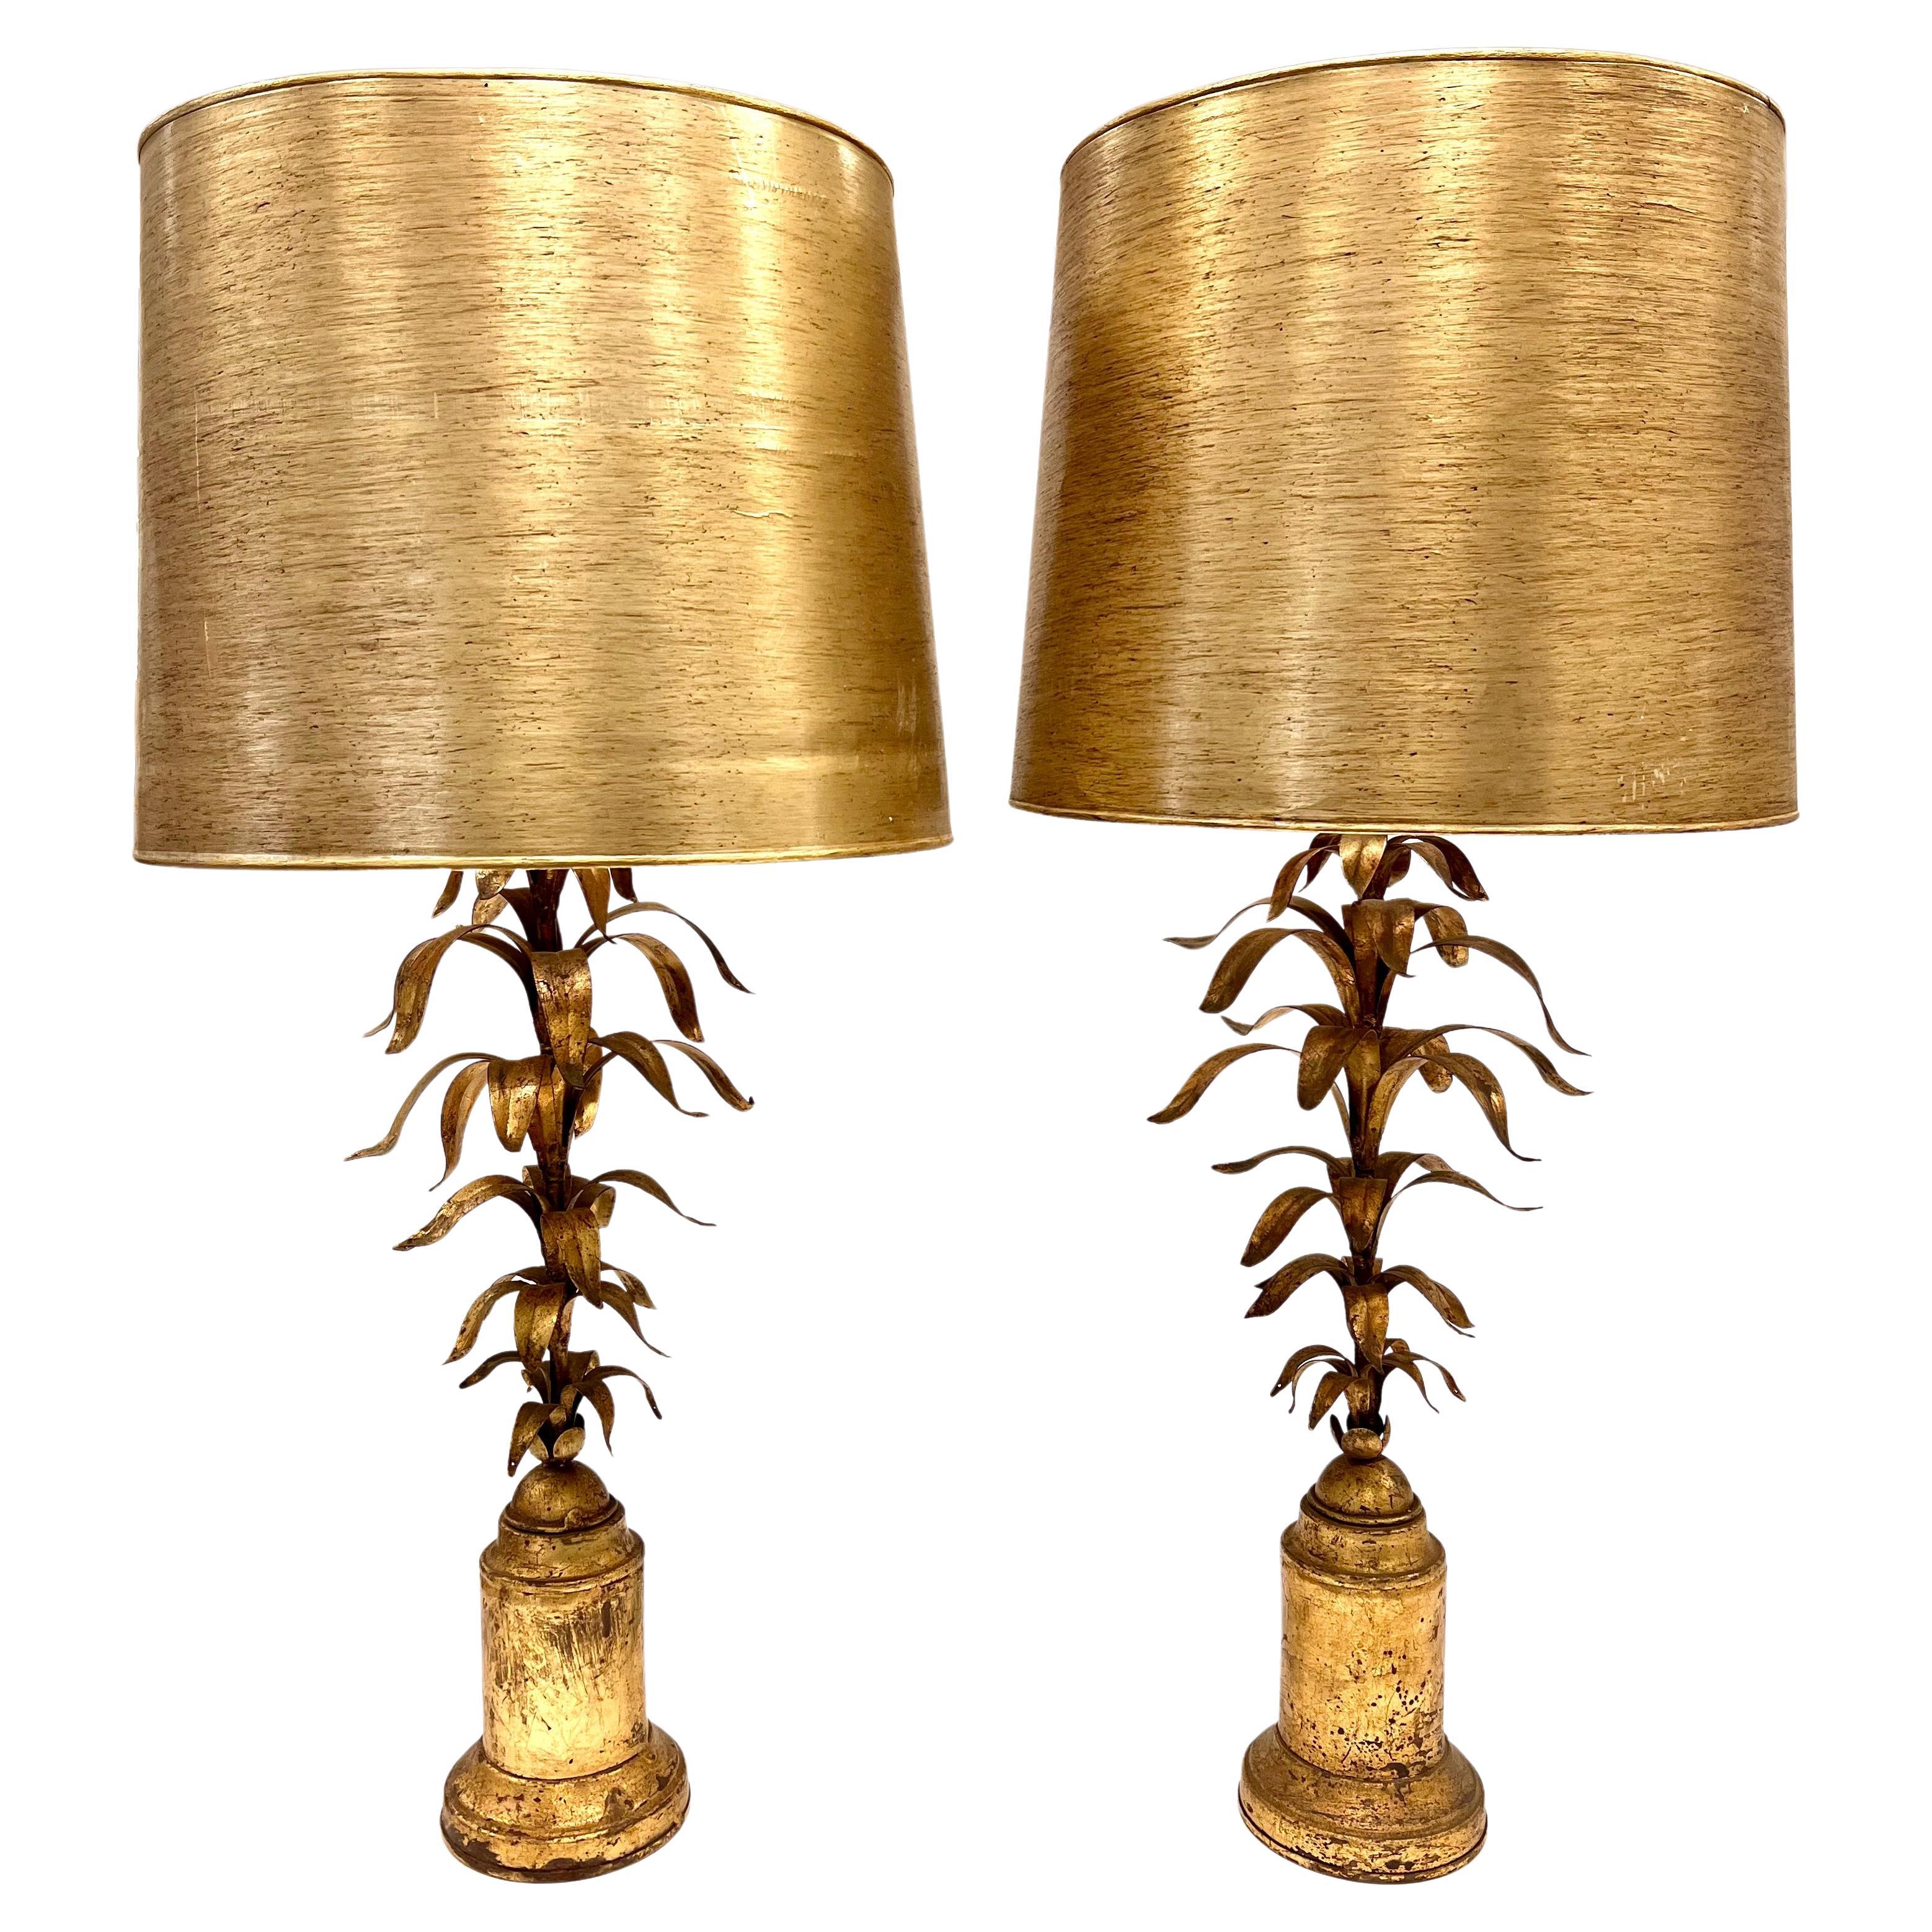 Pair of Italian Gold Gilt Metal Leaf Lamps with Gold Shades